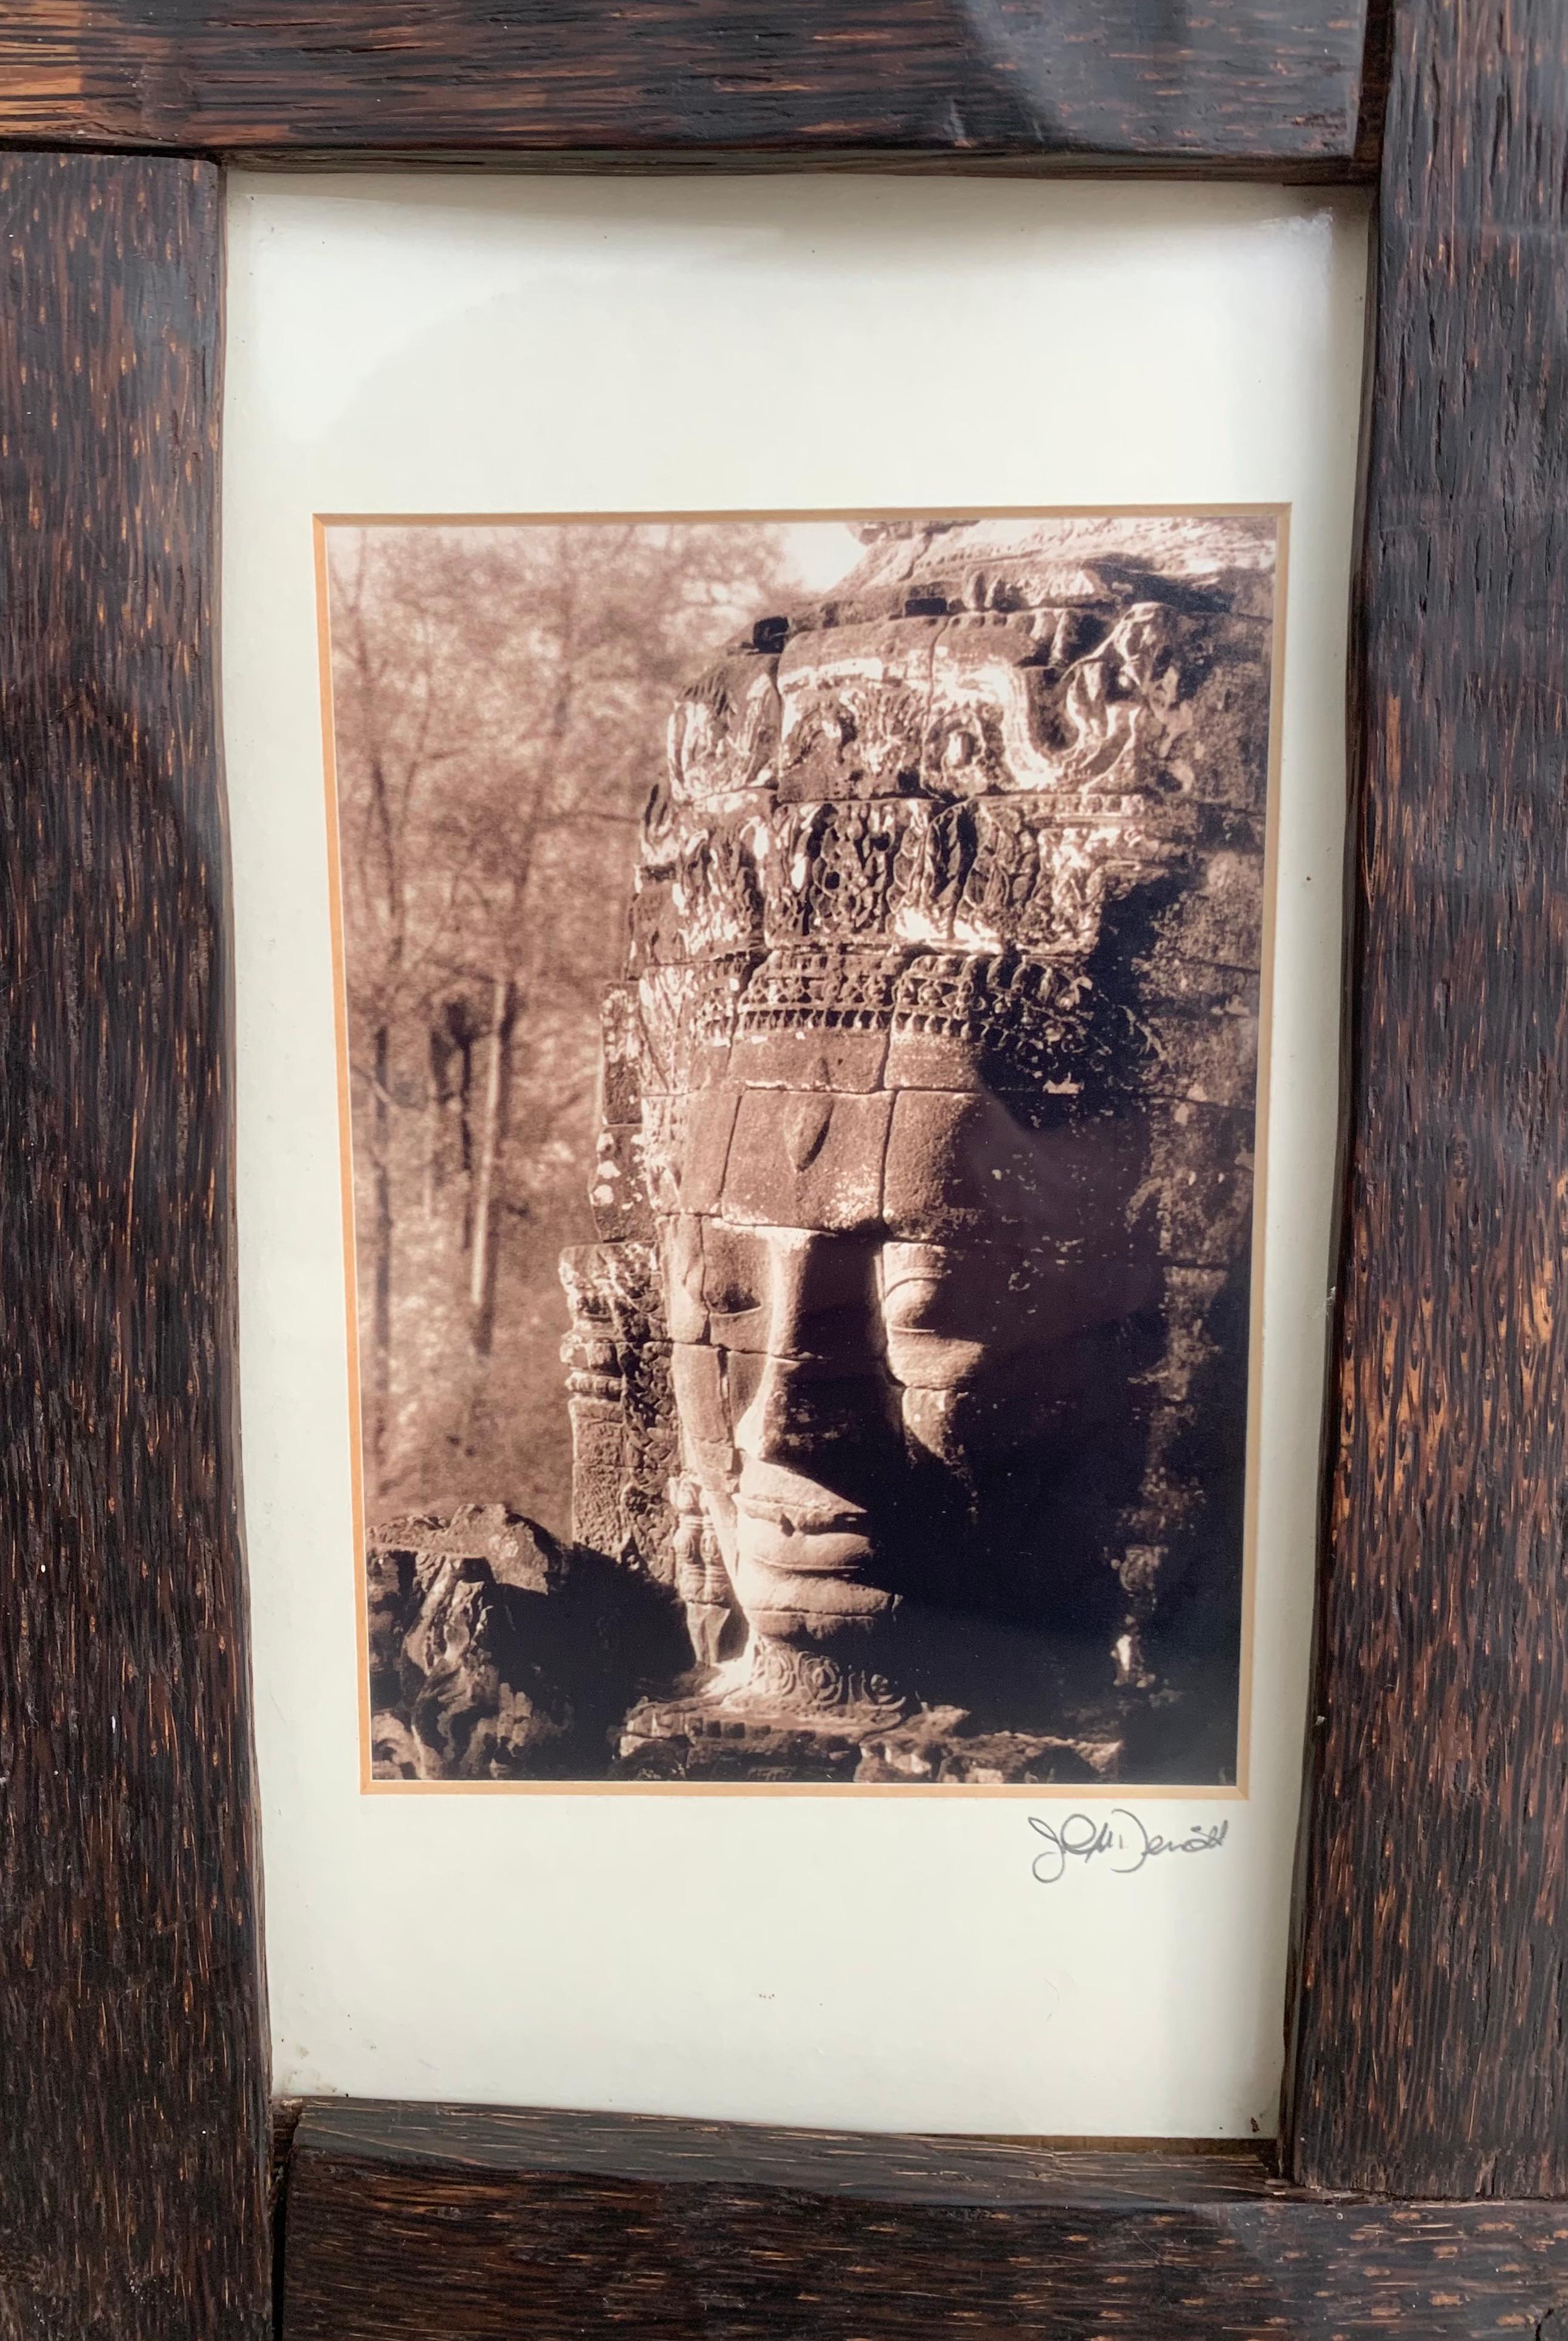 A vintage photograph from Cambodia framed in a palm wood & glass frame.

Dimensions: Height 38cm x Width 27cm x Depth 0.05cm.
    